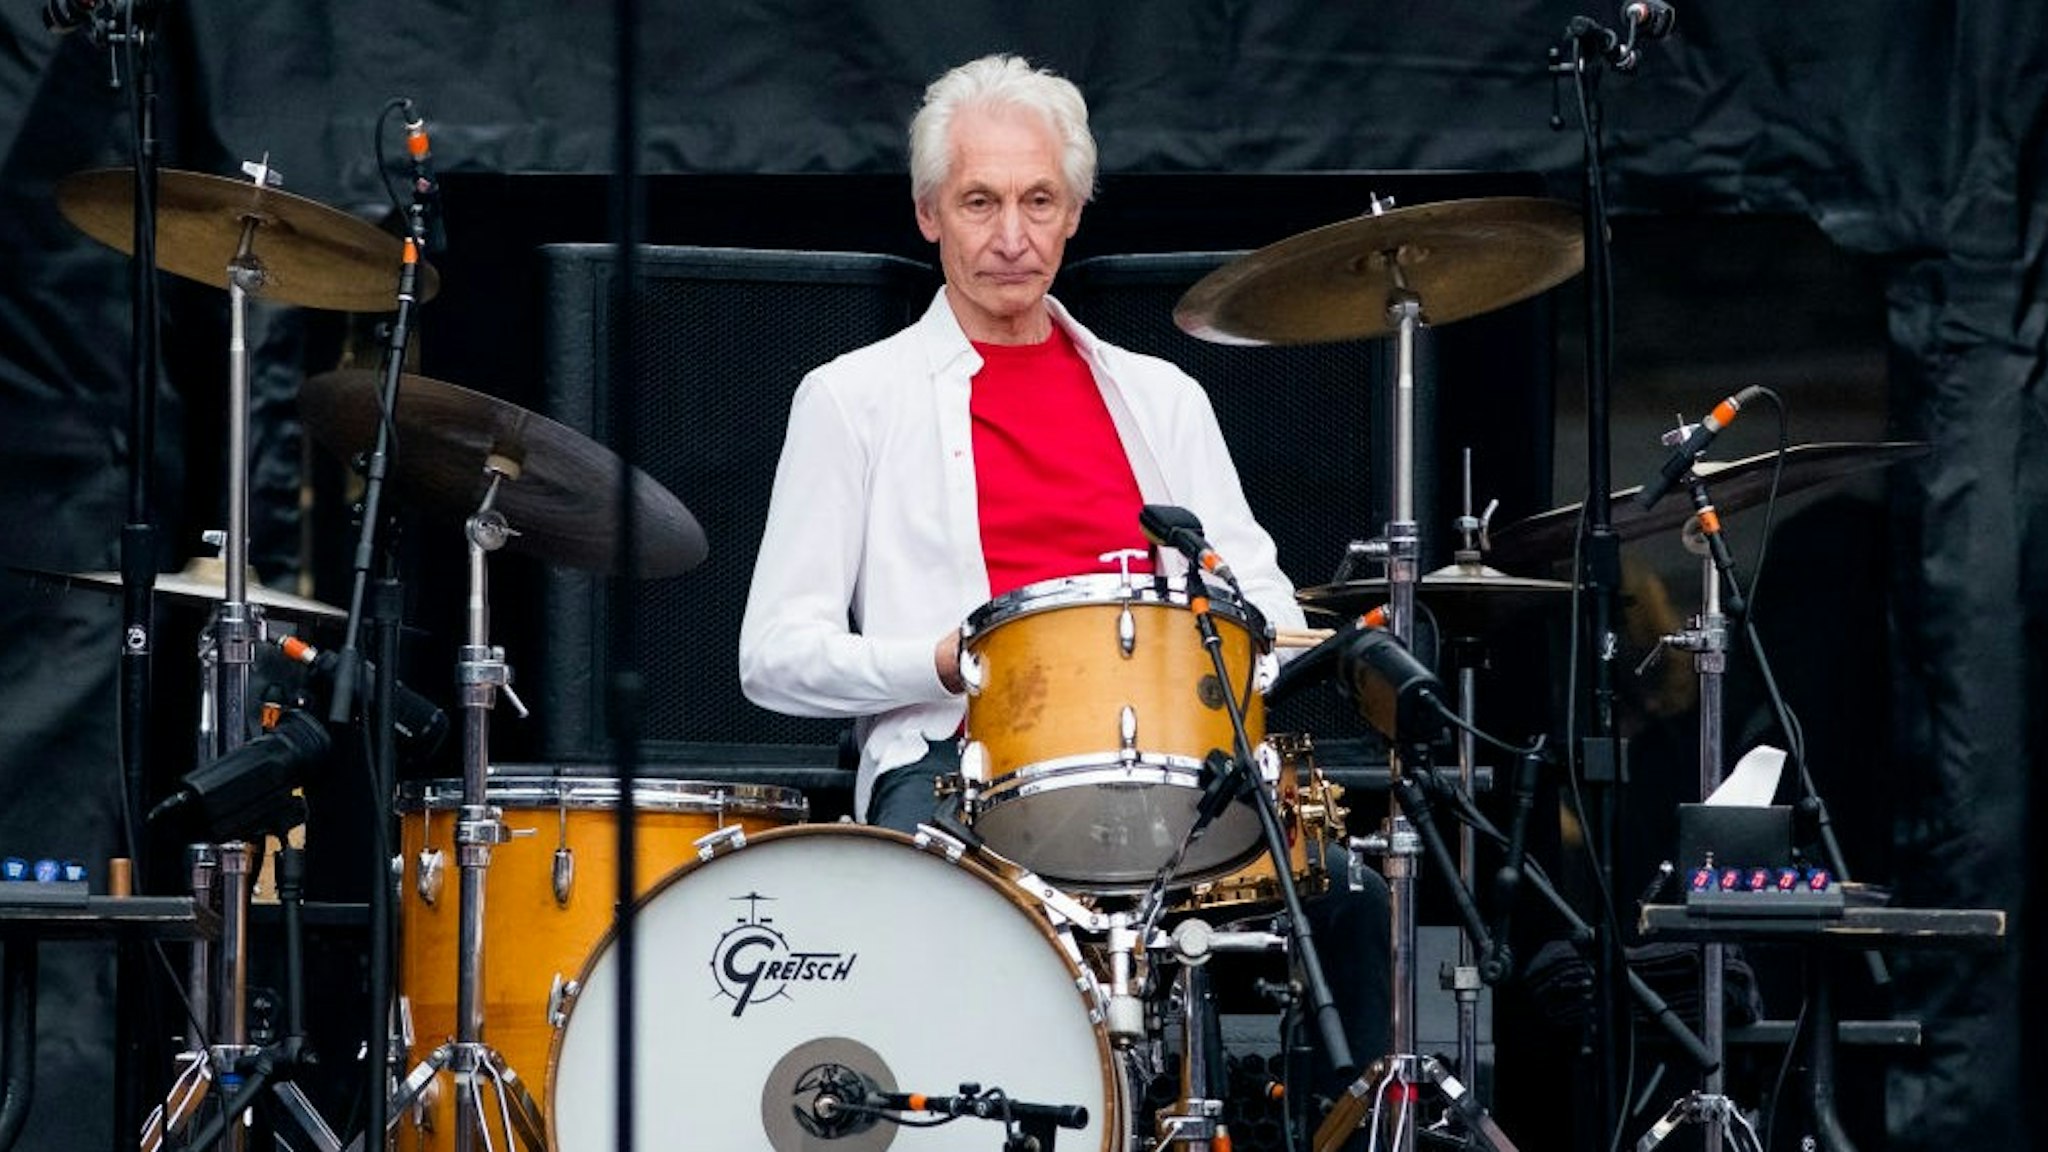 SOUTHAMPTON, ENGLAND - MAY 29: Charlie Watts of the Rolling Stones performs live on stage at St Mary's Stadium on May 29, 2018 in Southampton, England. (Photo by